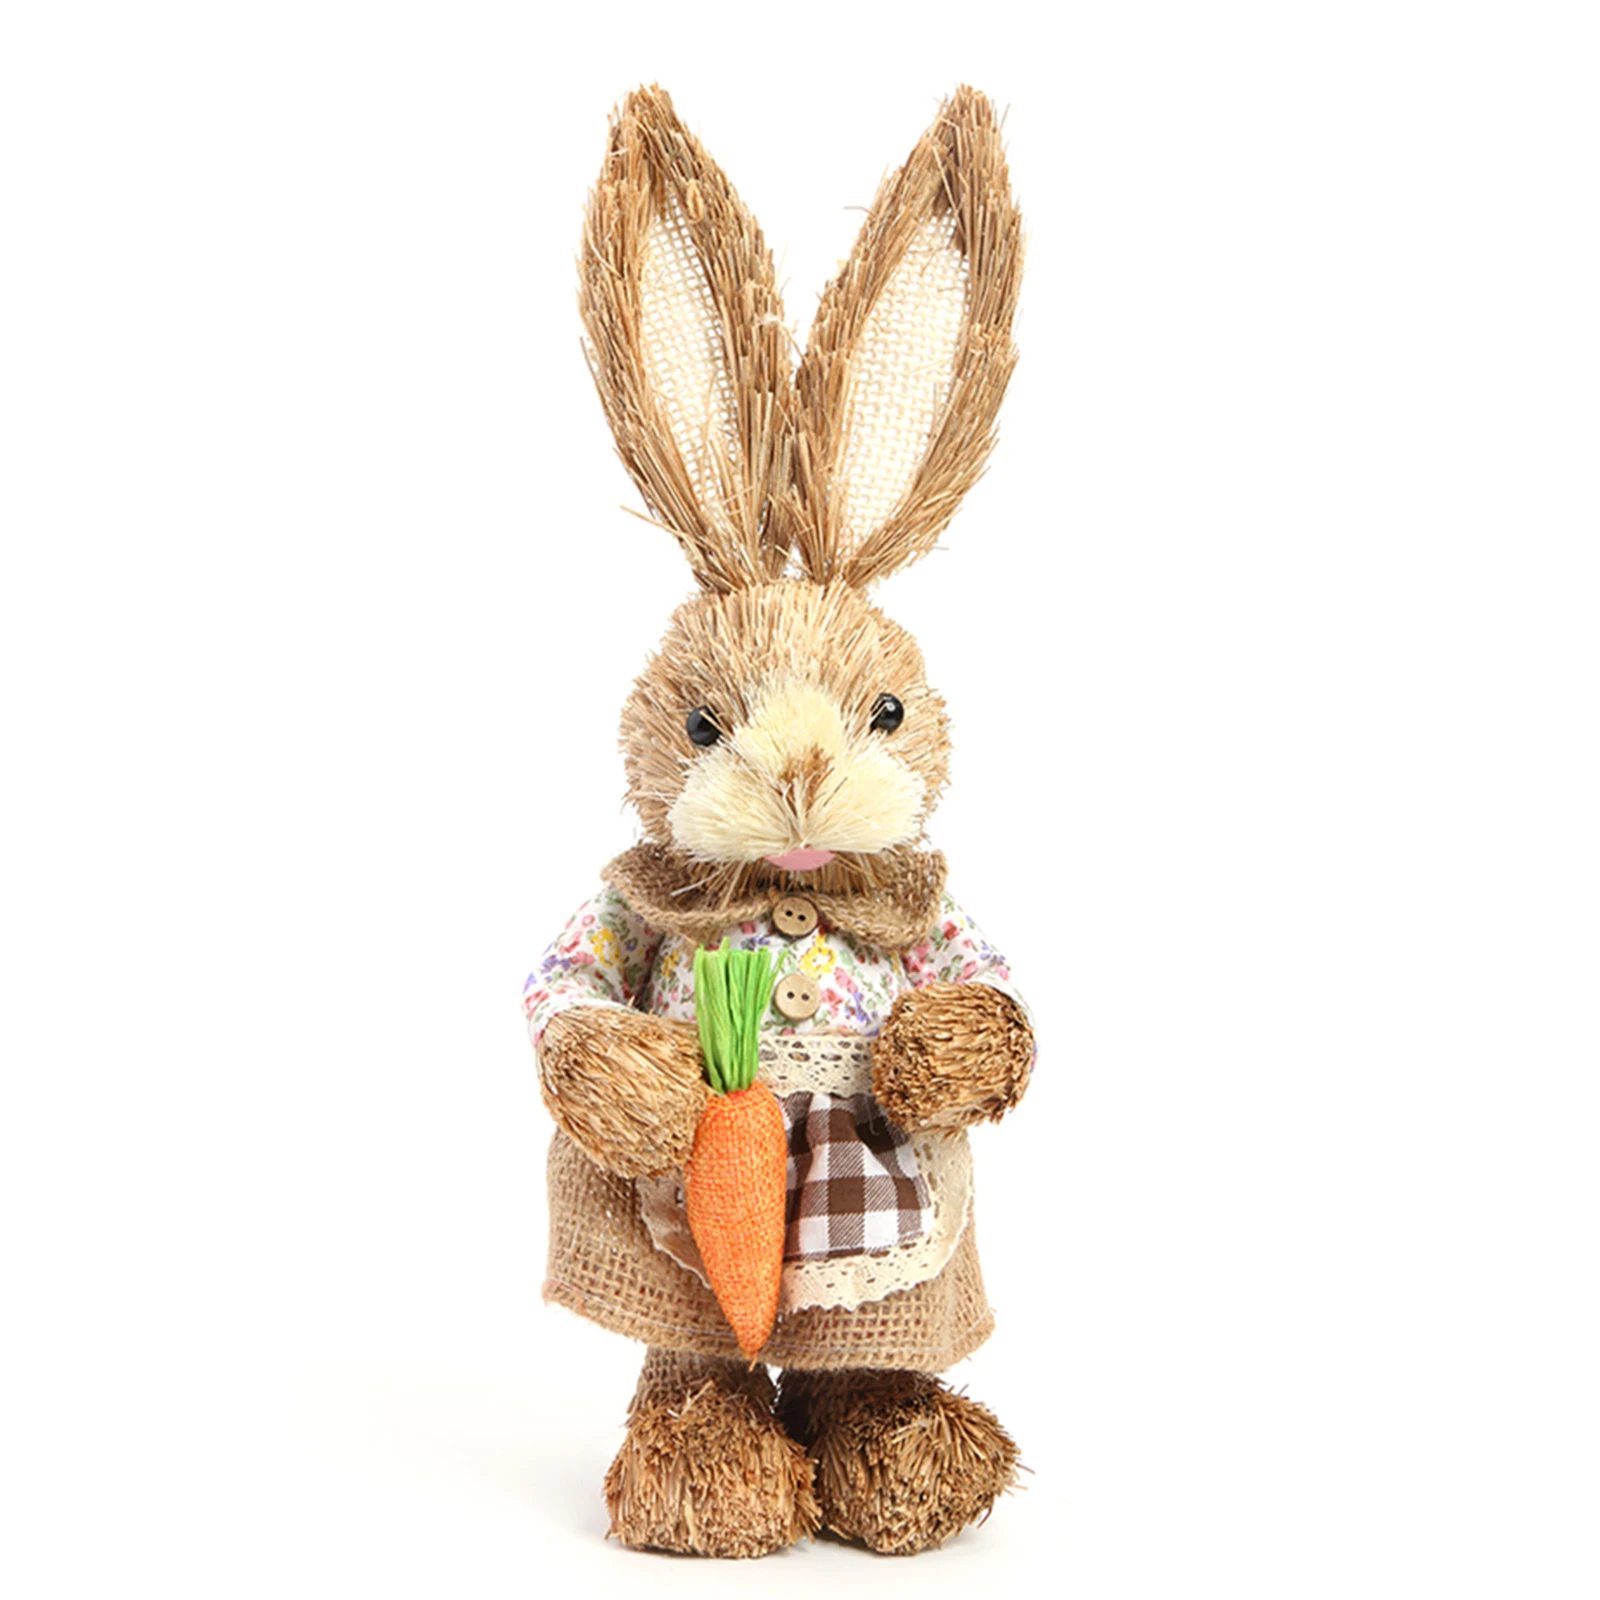 35cm Traditional Straw Easter Bunny Rabbit Home Decoration Blue Jacket Tie Boy 